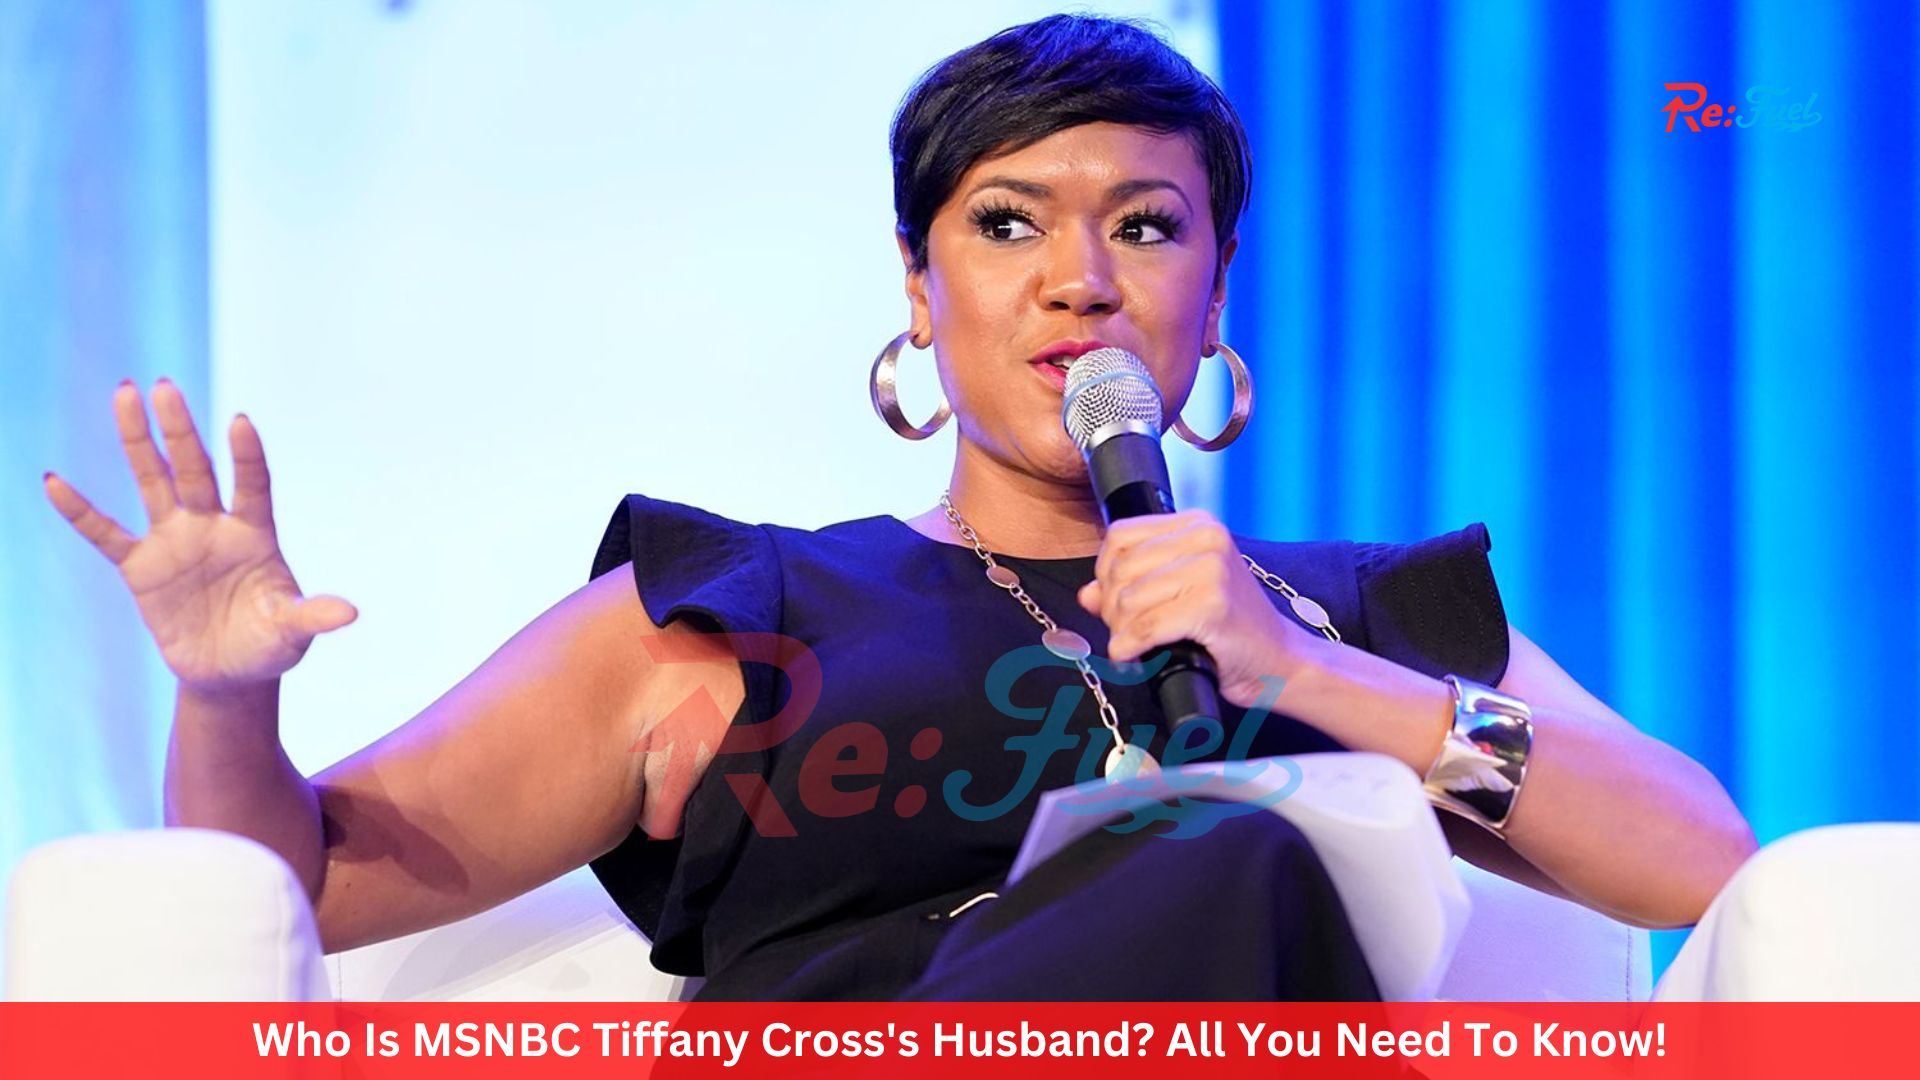 Who Is MSNBC Tiffany Cross's Husband? All You Need To Know!